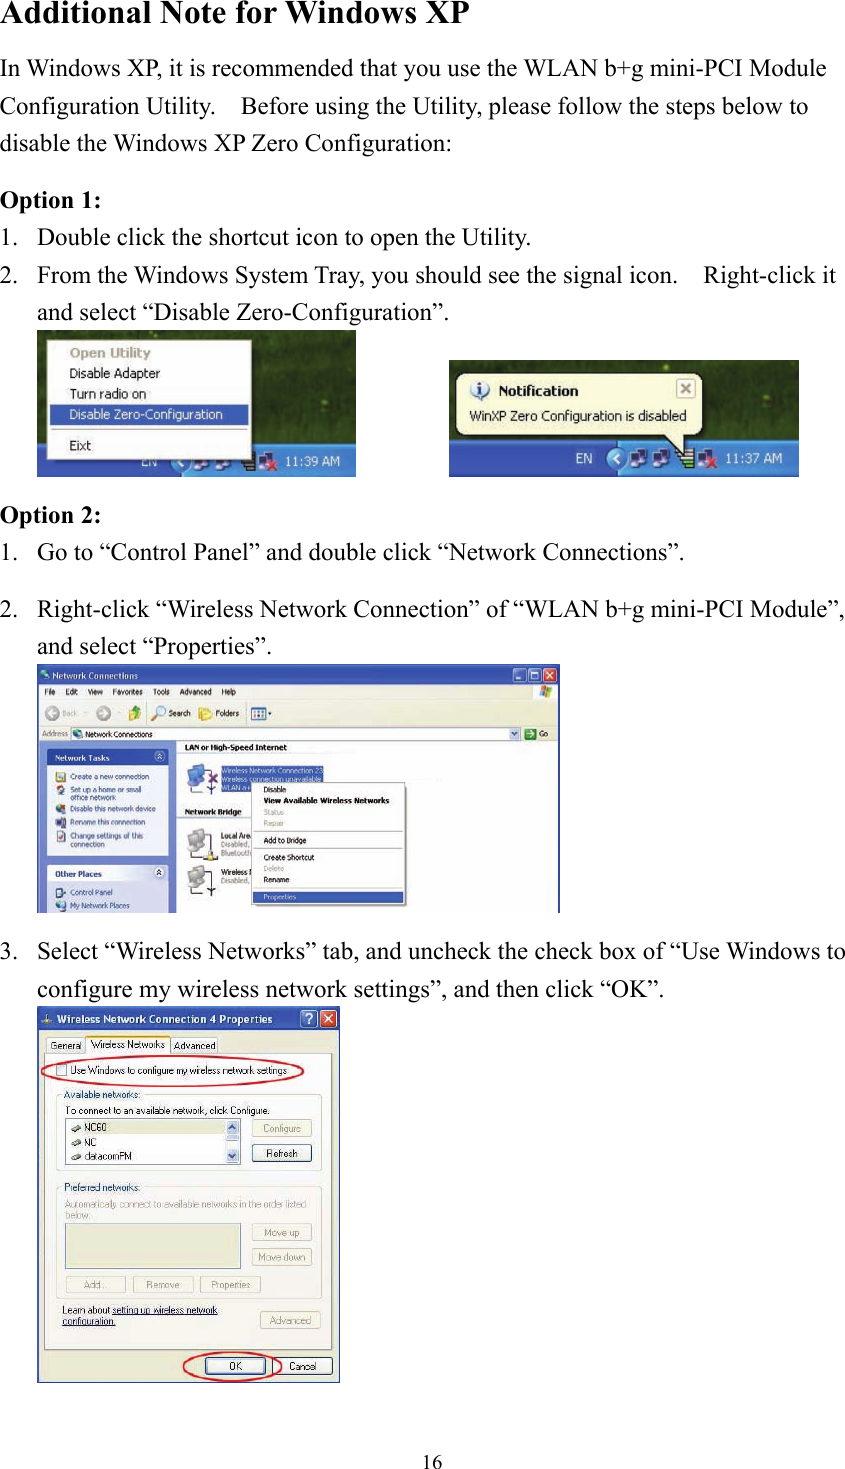  16Additional Note for Windows XP   In Windows XP, it is recommended that you use the WLAN b+g mini-PCI Module Configuration Utility.    Before using the Utility, please follow the steps below to disable the Windows XP Zero Configuration:  Option 1: 1.  Double click the shortcut icon to open the Utility. 2.  From the Windows System Tray, you should see the signal icon.    Right-click it and select “Disable Zero-Configuration”.     Option 2: 1.  Go to “Control Panel” and double click “Network Connections”.  2.  Right-click “Wireless Network Connection” of “WLAN b+g mini-PCI Module”, and select “Properties”.   3.  Select “Wireless Networks” tab, and uncheck the check box of “Use Windows to configure my wireless network settings”, and then click “OK”.  